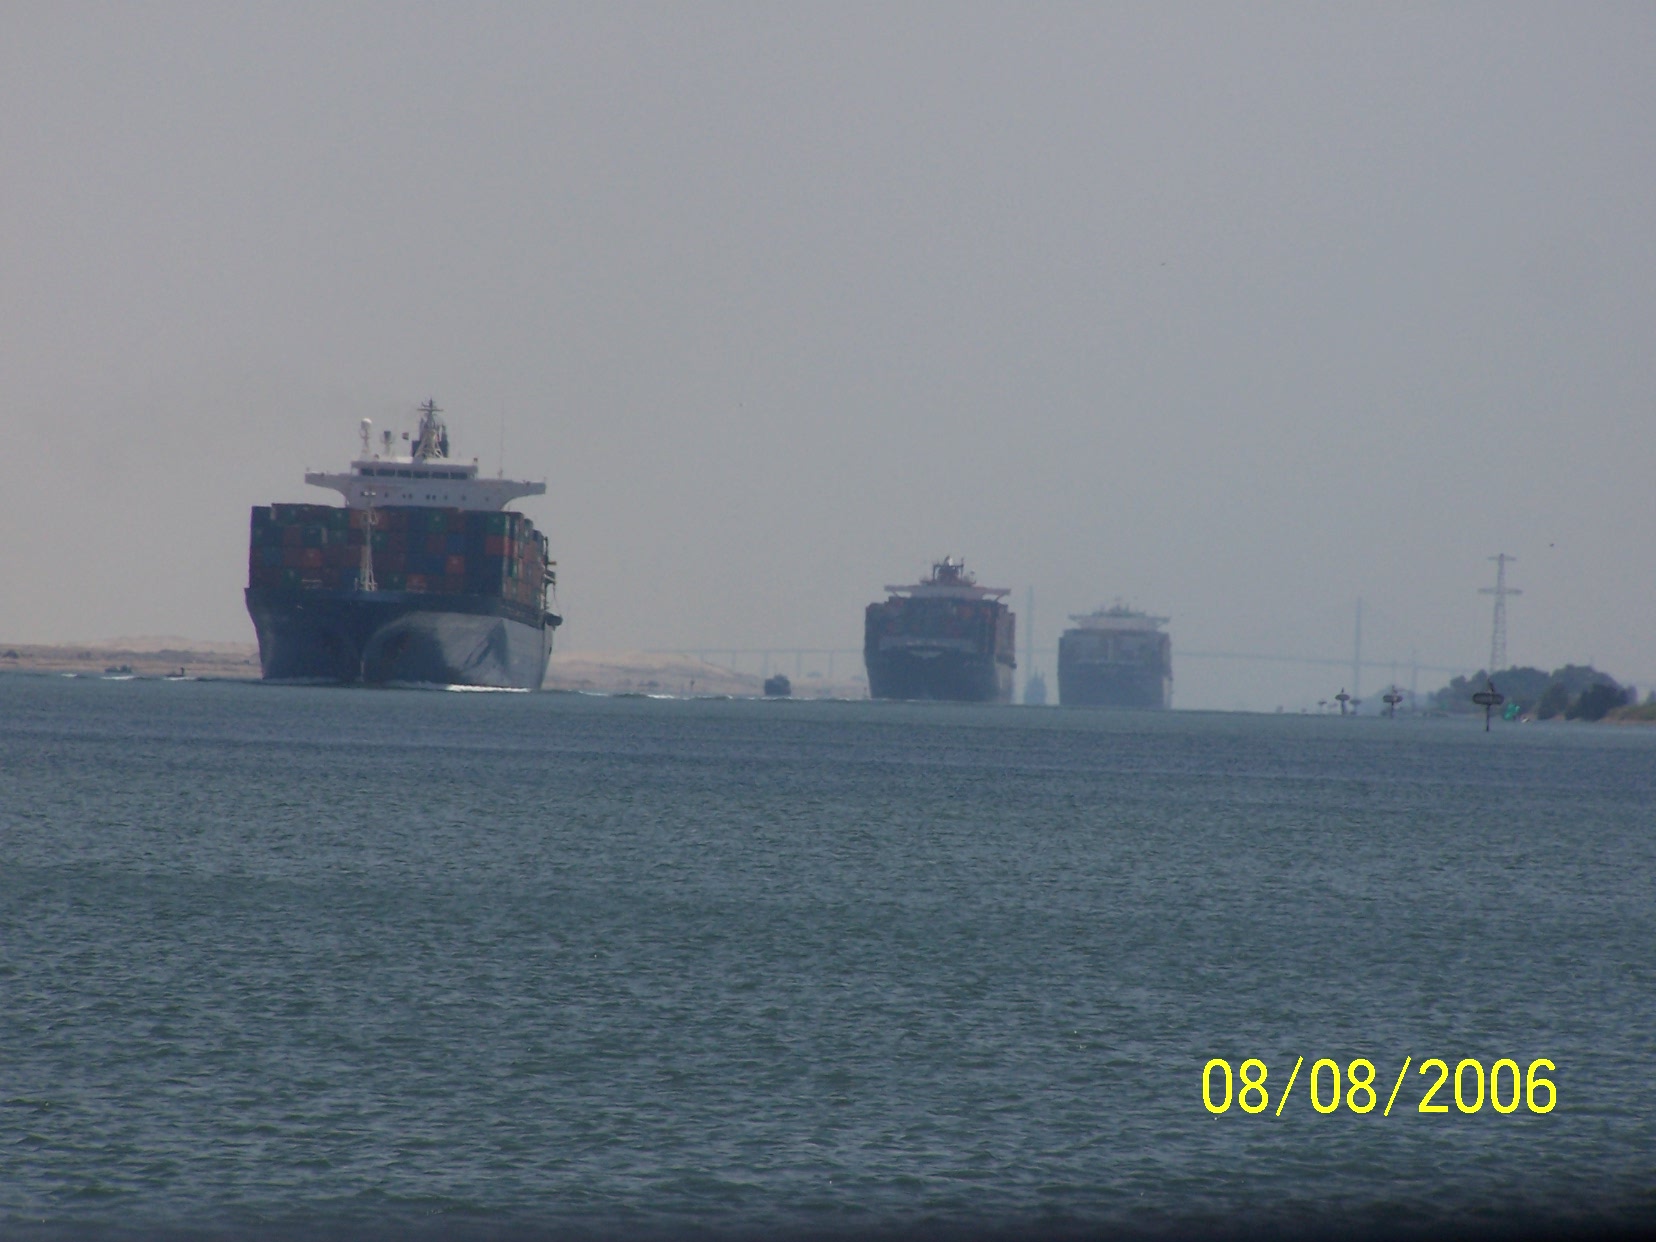 Convoy in the Suez canal